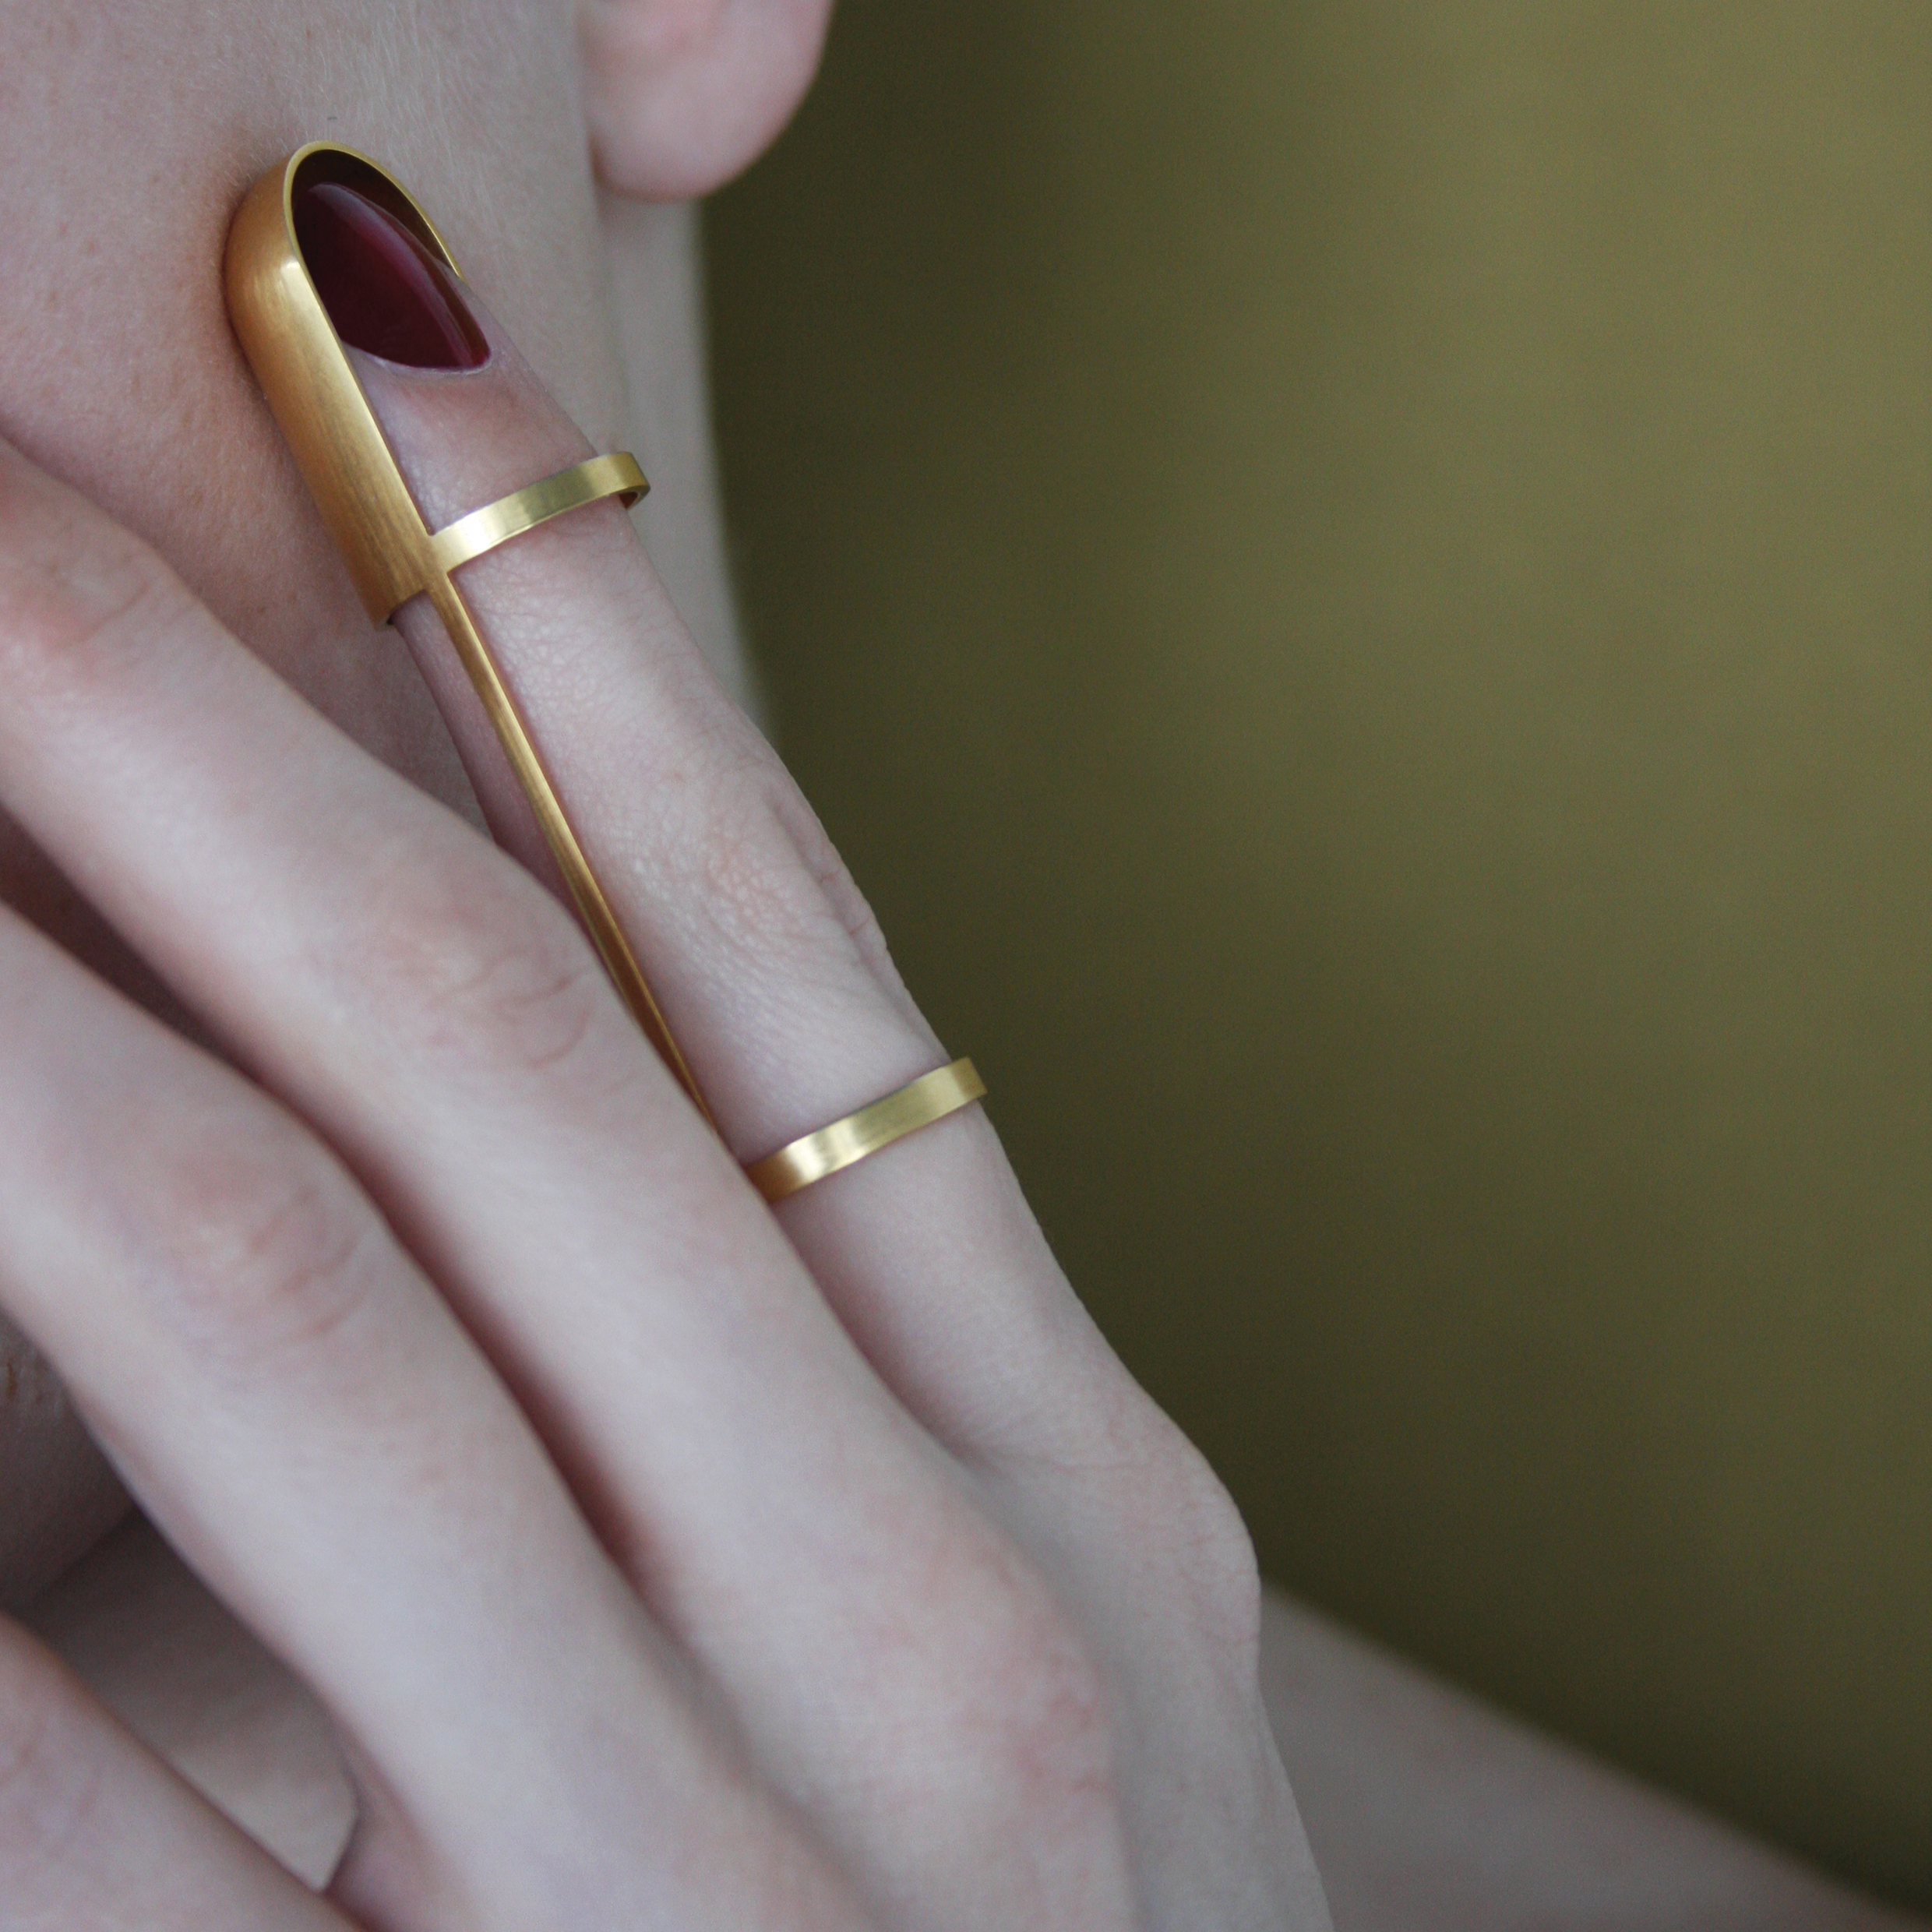 design-jewelry-CHP65-index-ring-hoko-stainless-steel-goldplated-worn ...